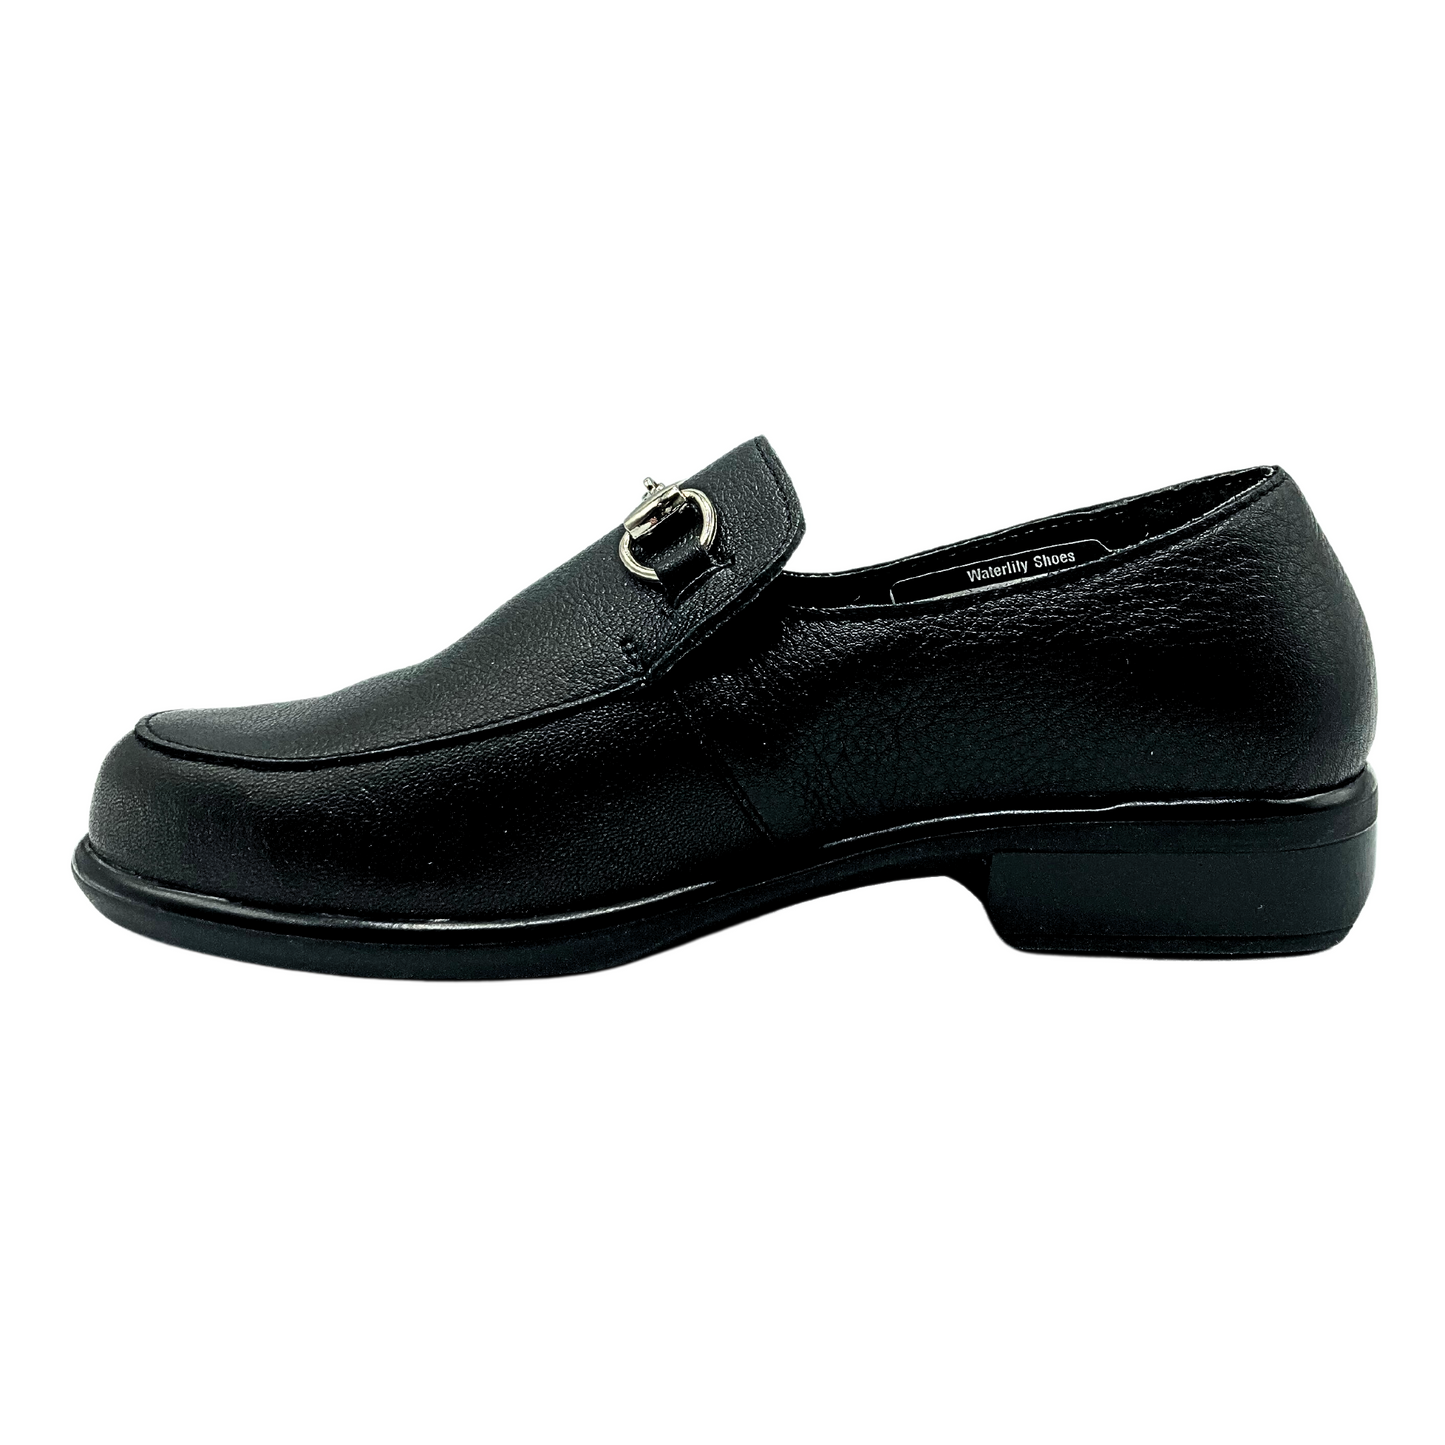 Inside view of basic loafer in black leather.  Slight lift in the heel